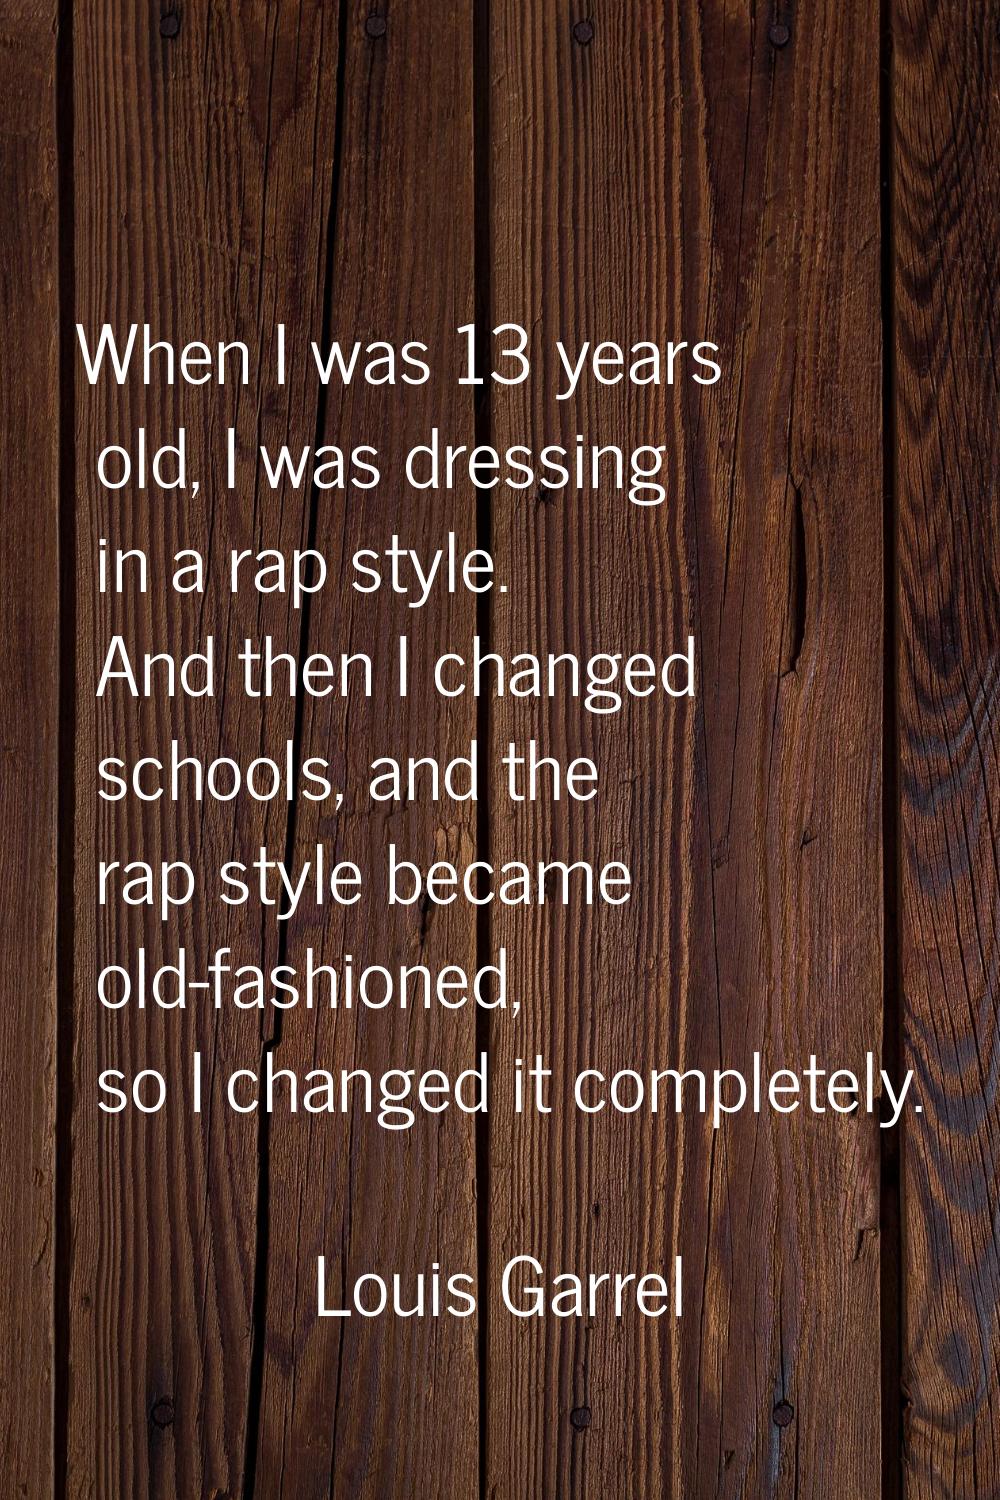 When I was 13 years old, I was dressing in a rap style. And then I changed schools, and the rap sty